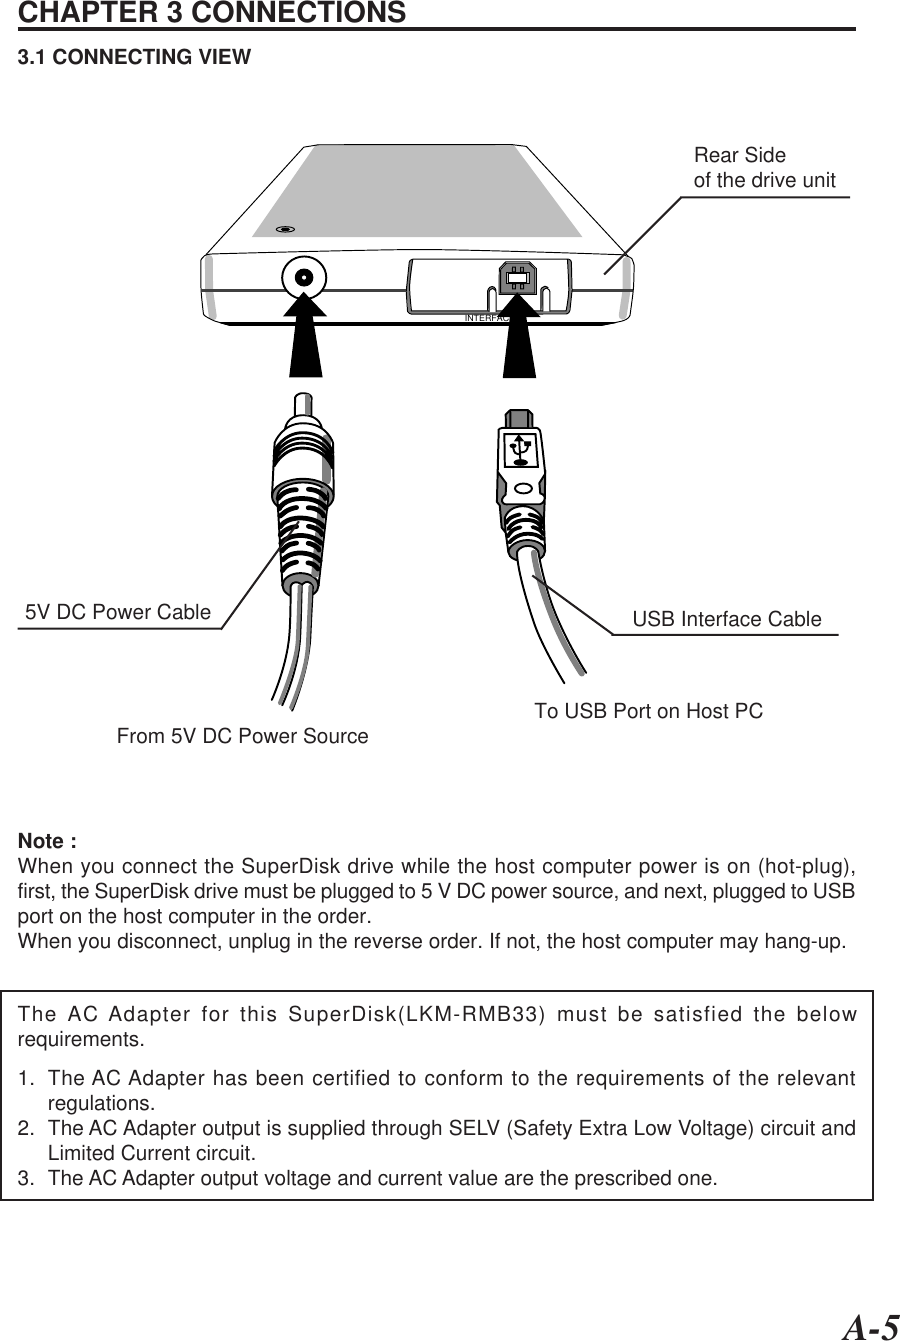 A-5CHAPTER 3 CONNECTIONS3.1 CONNECTING VIEWINTERFACEFrom 5V DC Power Source To USB Port on Host PC5V DC Power Cable USB Interface CableNote :When you connect the SuperDisk drive while the host computer power is on (hot-plug),first, the SuperDisk drive must be plugged to 5 V DC power source, and next, plugged to USBport on the host computer in the order.When you disconnect, unplug in the reverse order. If not, the host computer may hang-up.Rear Sideof the drive unitThe AC Adapter for this SuperDisk(LKM-RMB33) must be satisfied the belowrequirements.1. The AC Adapter has been certified to conform to the requirements of the relevantregulations.2. The AC Adapter output is supplied through SELV (Safety Extra Low Voltage) circuit andLimited Current circuit.3. The AC Adapter output voltage and current value are the prescribed one.